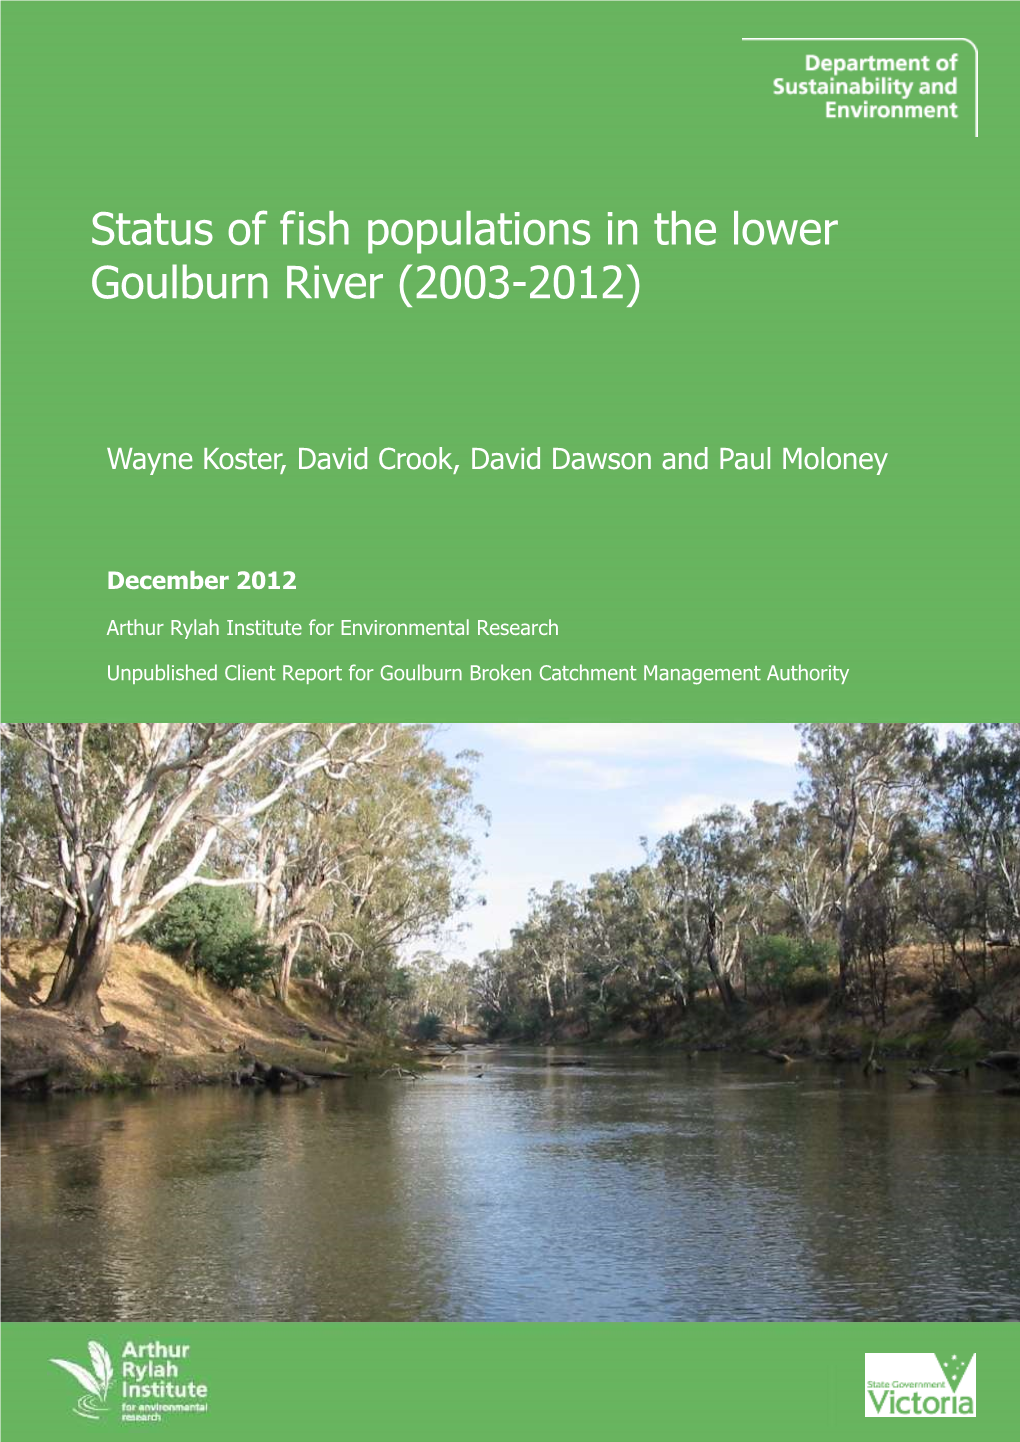 Status of Fish Populations in the Lower Goulburn River (2003-2012)